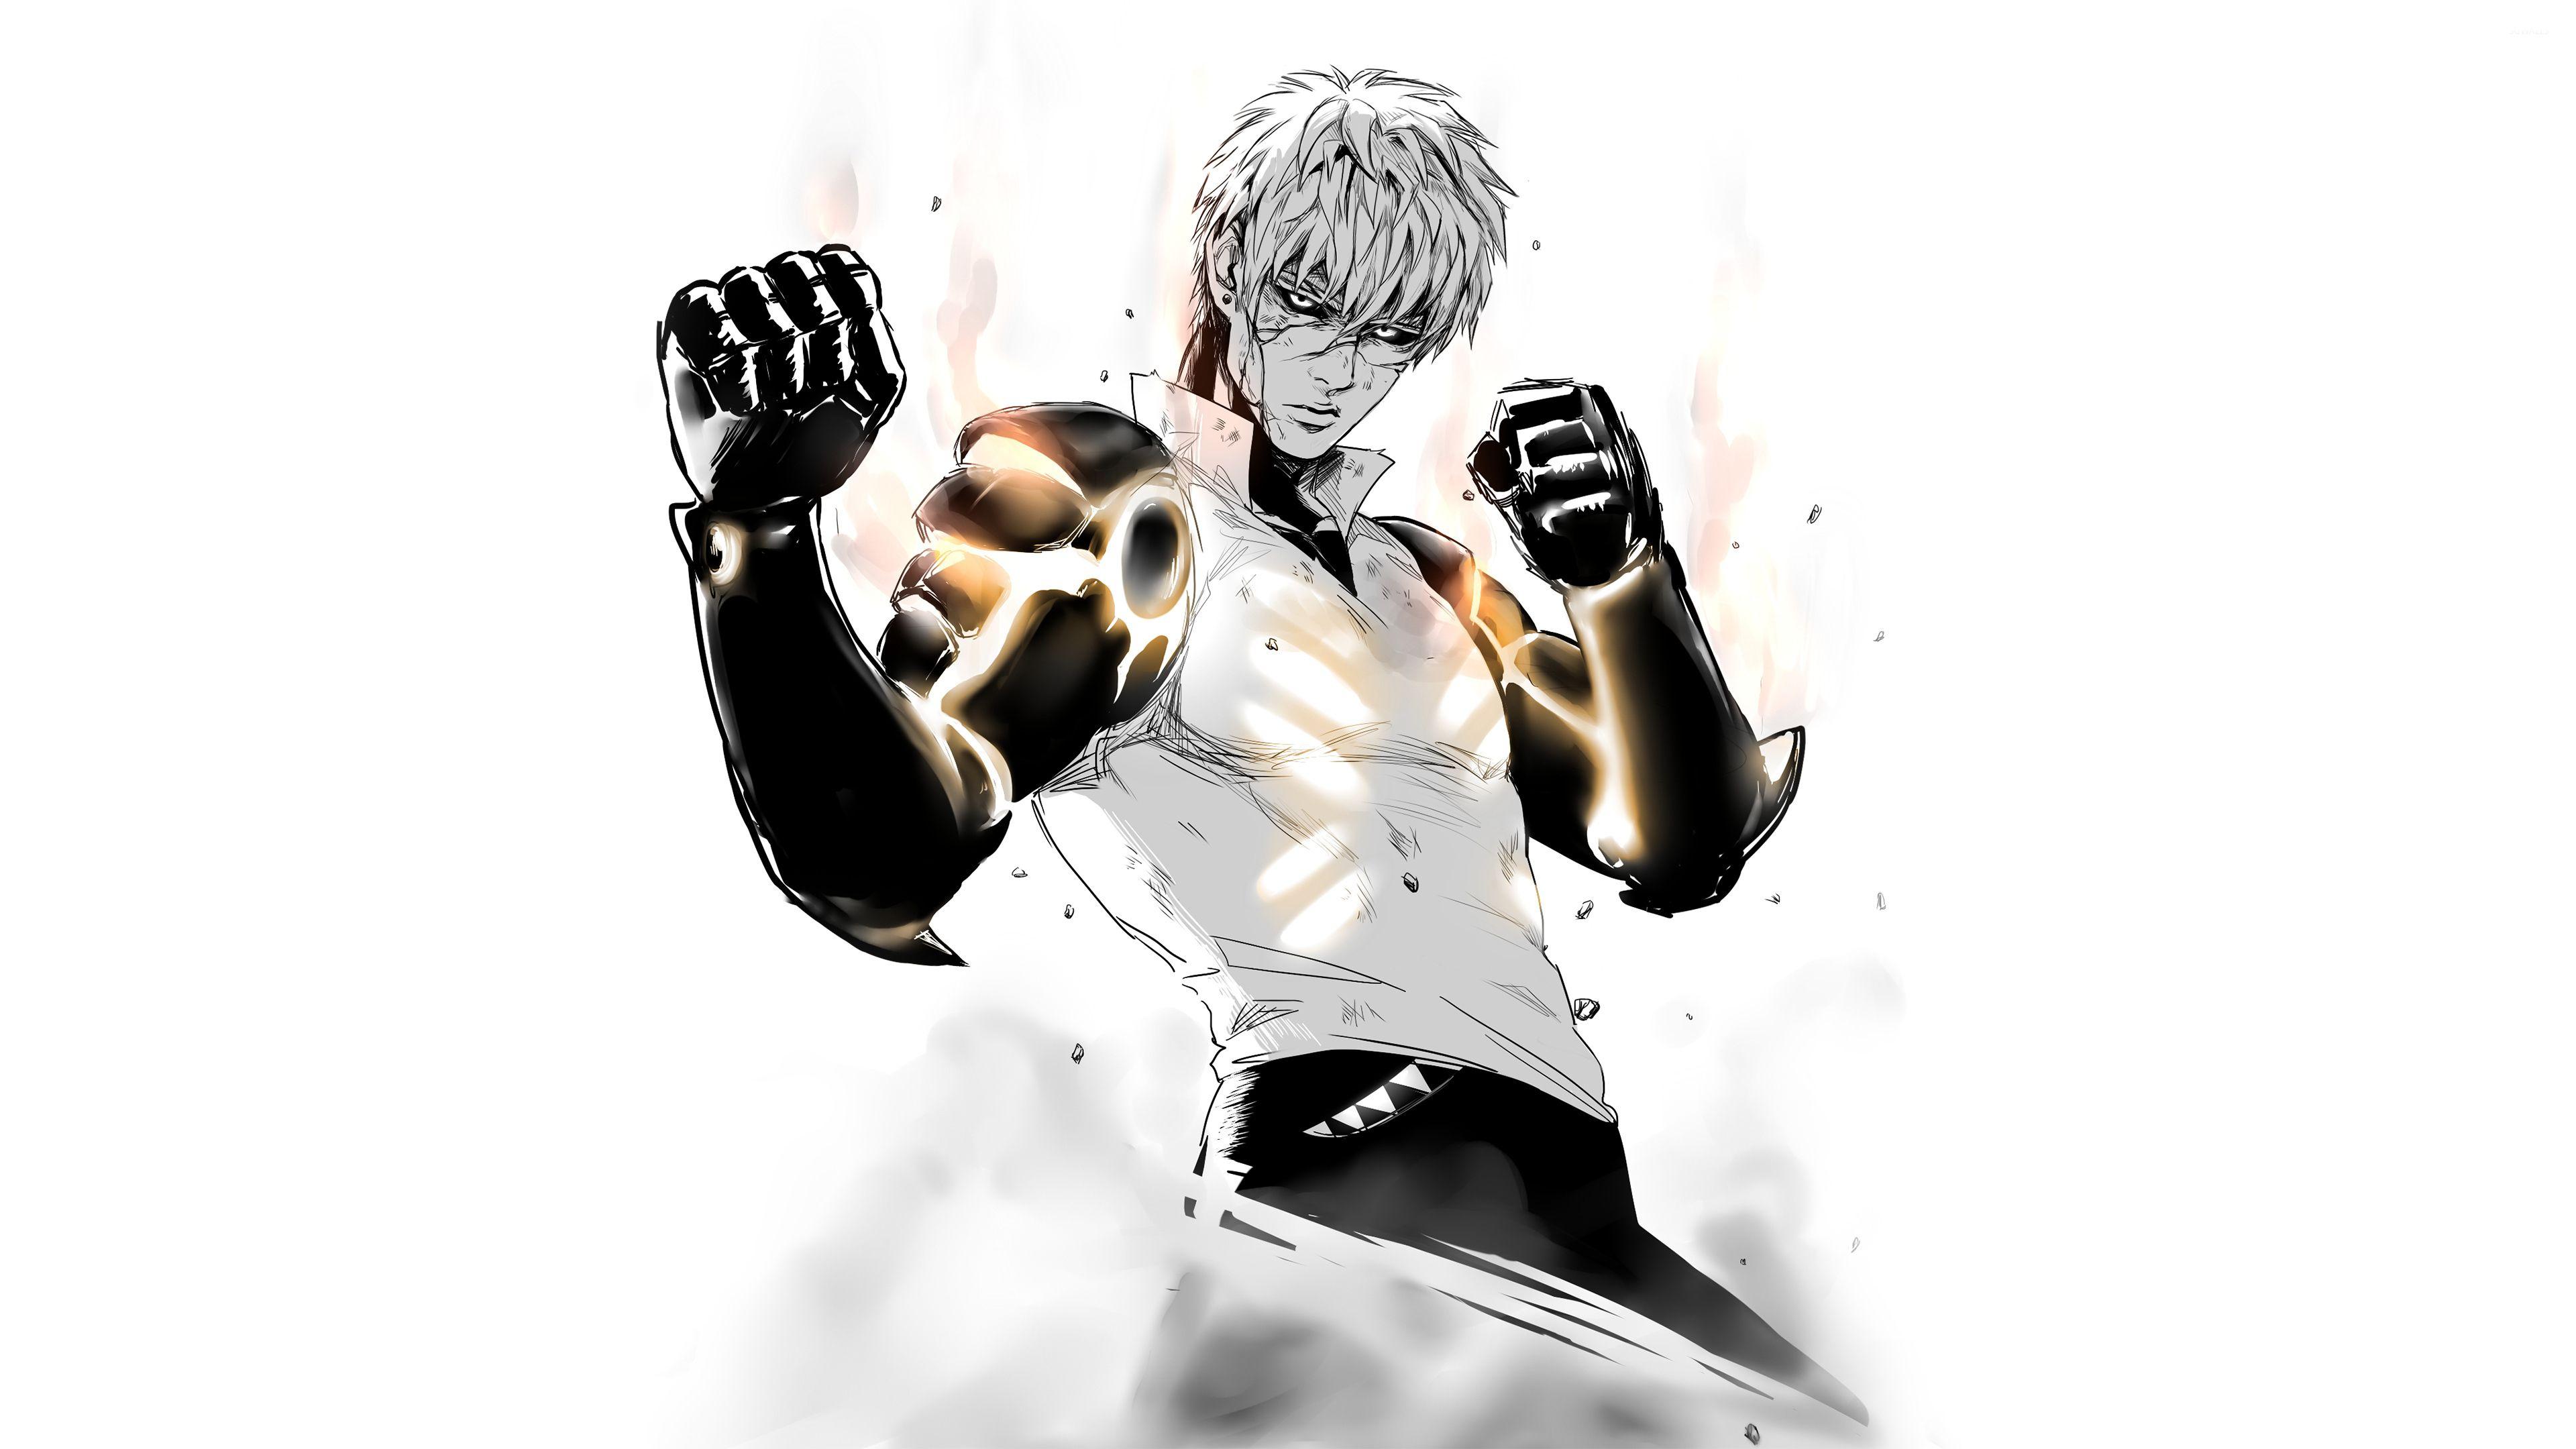 Genos Ready To Fight In One Punch Man Wallpaper Wallpaper